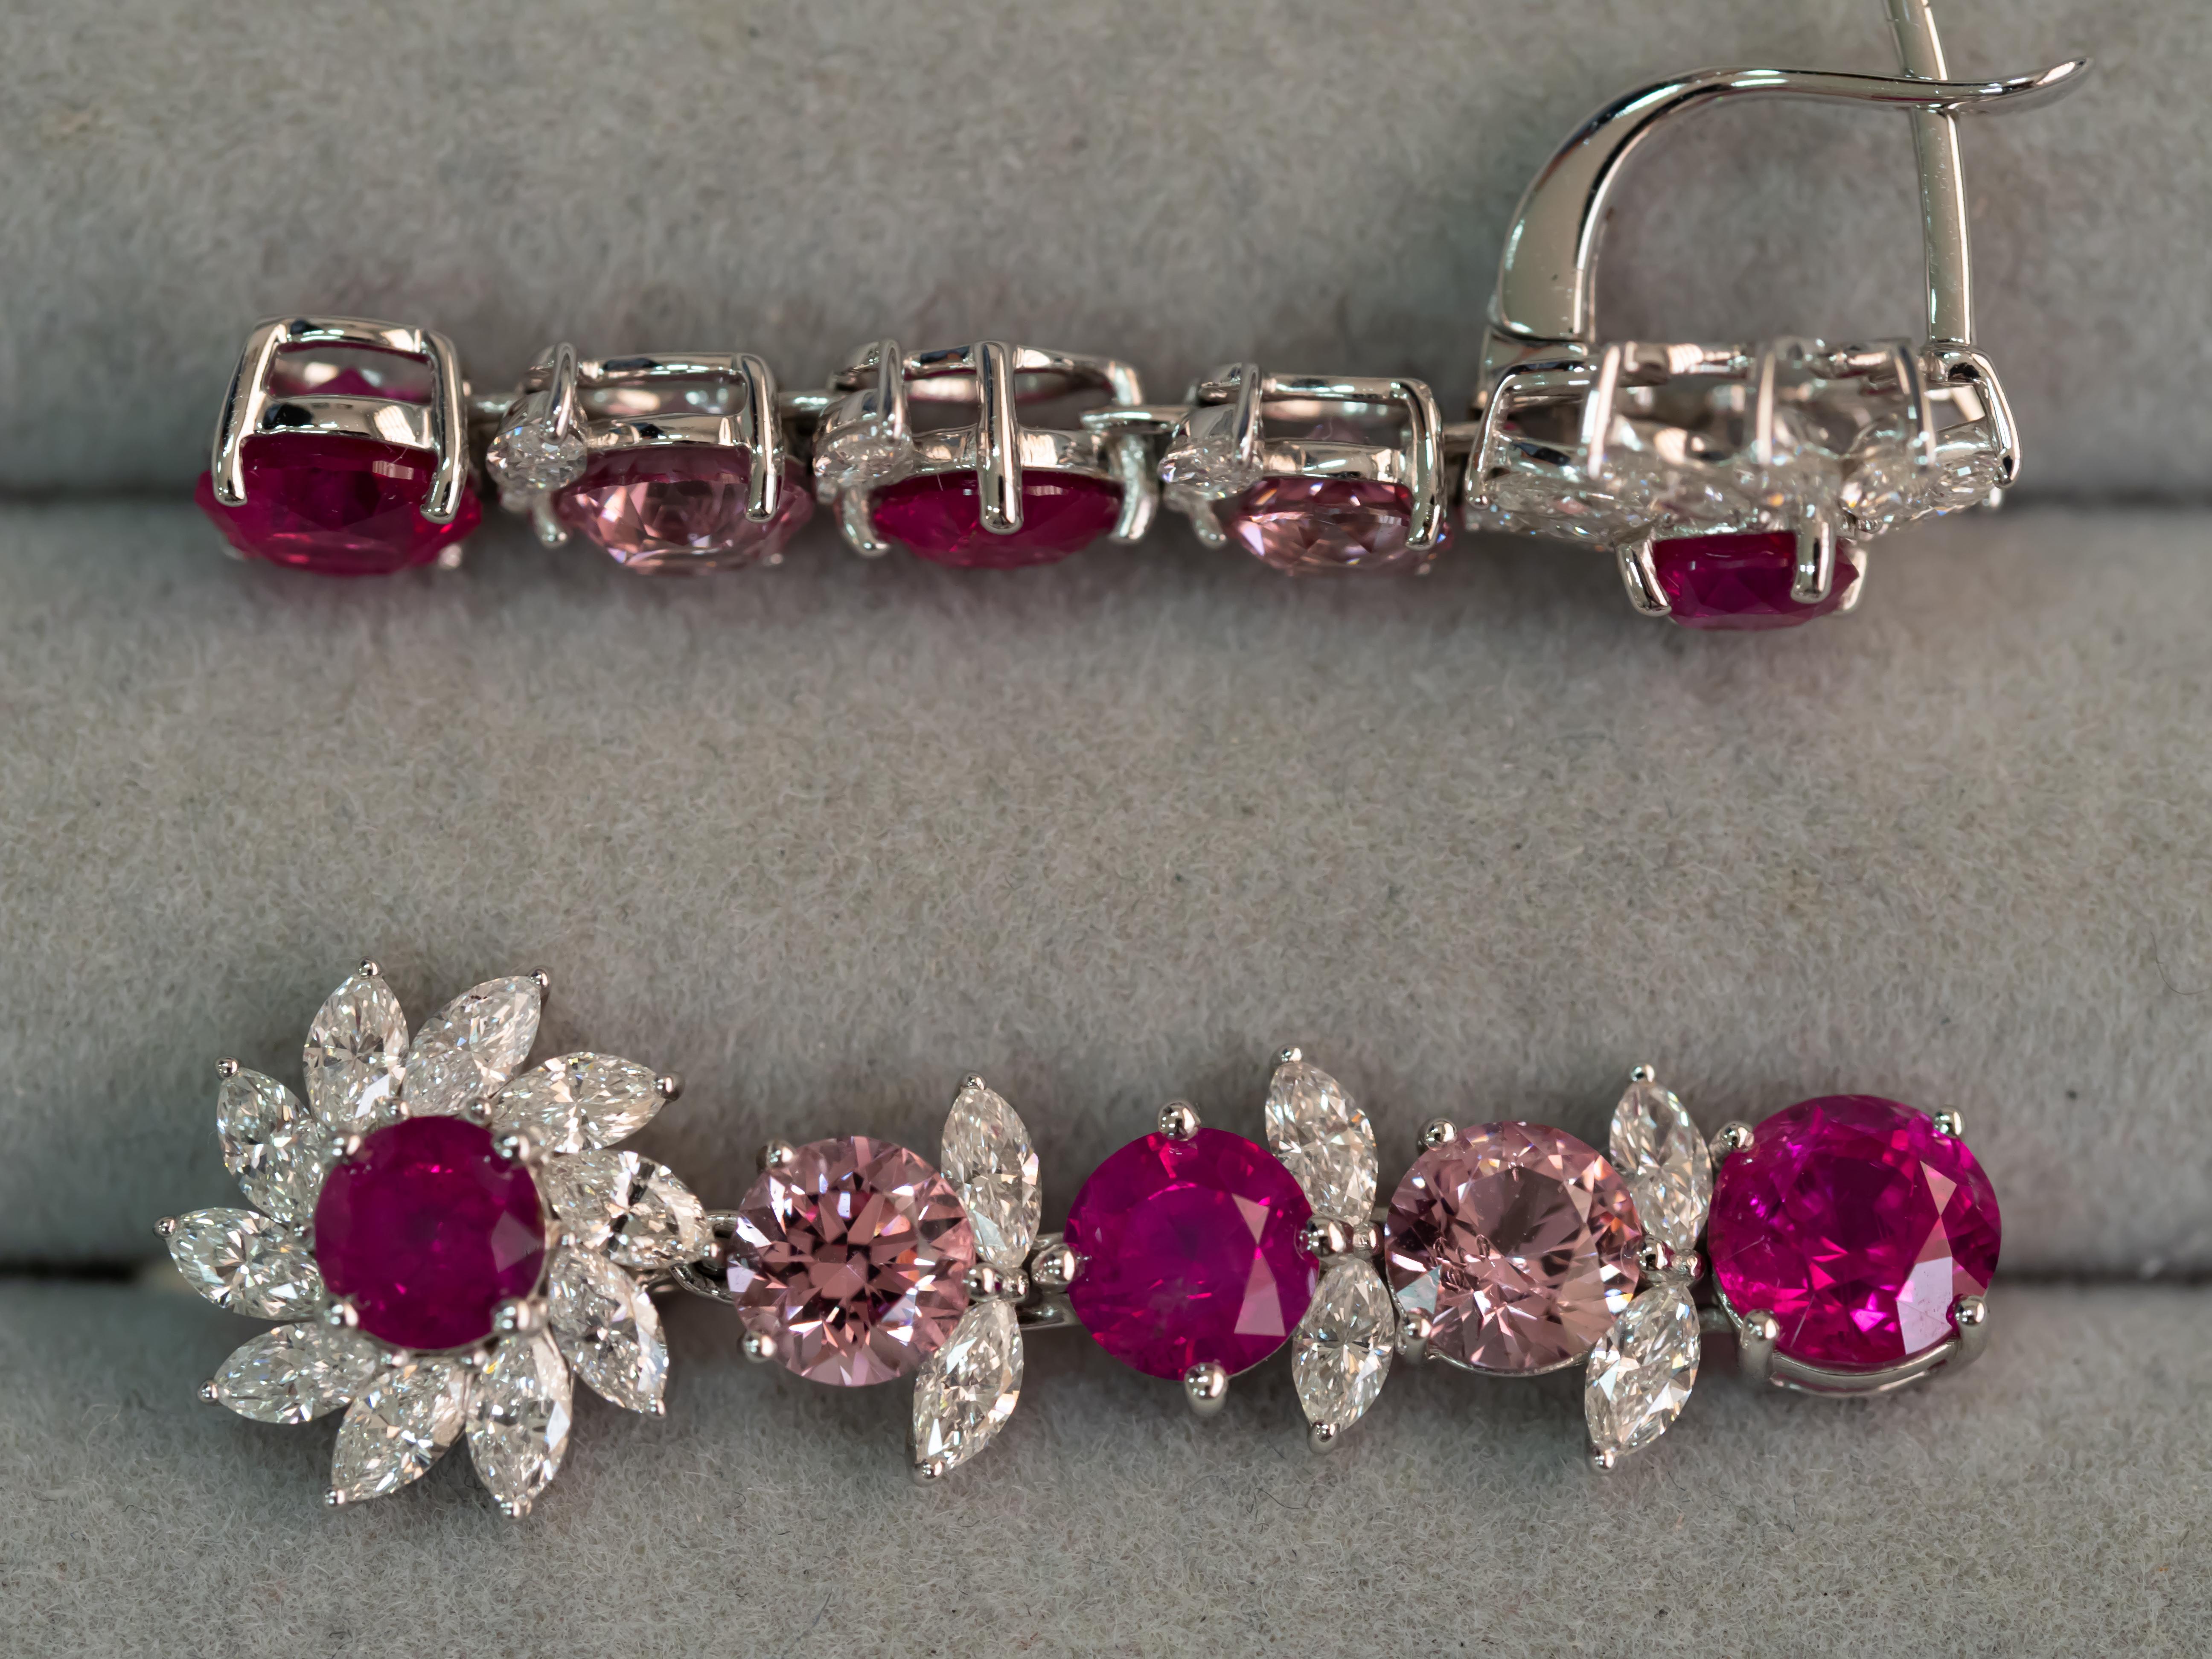 Mixed Cut Rubies Spinels & Diamonds Earrings, 18k White Gold Unheated Rubies & Spinels Er For Sale